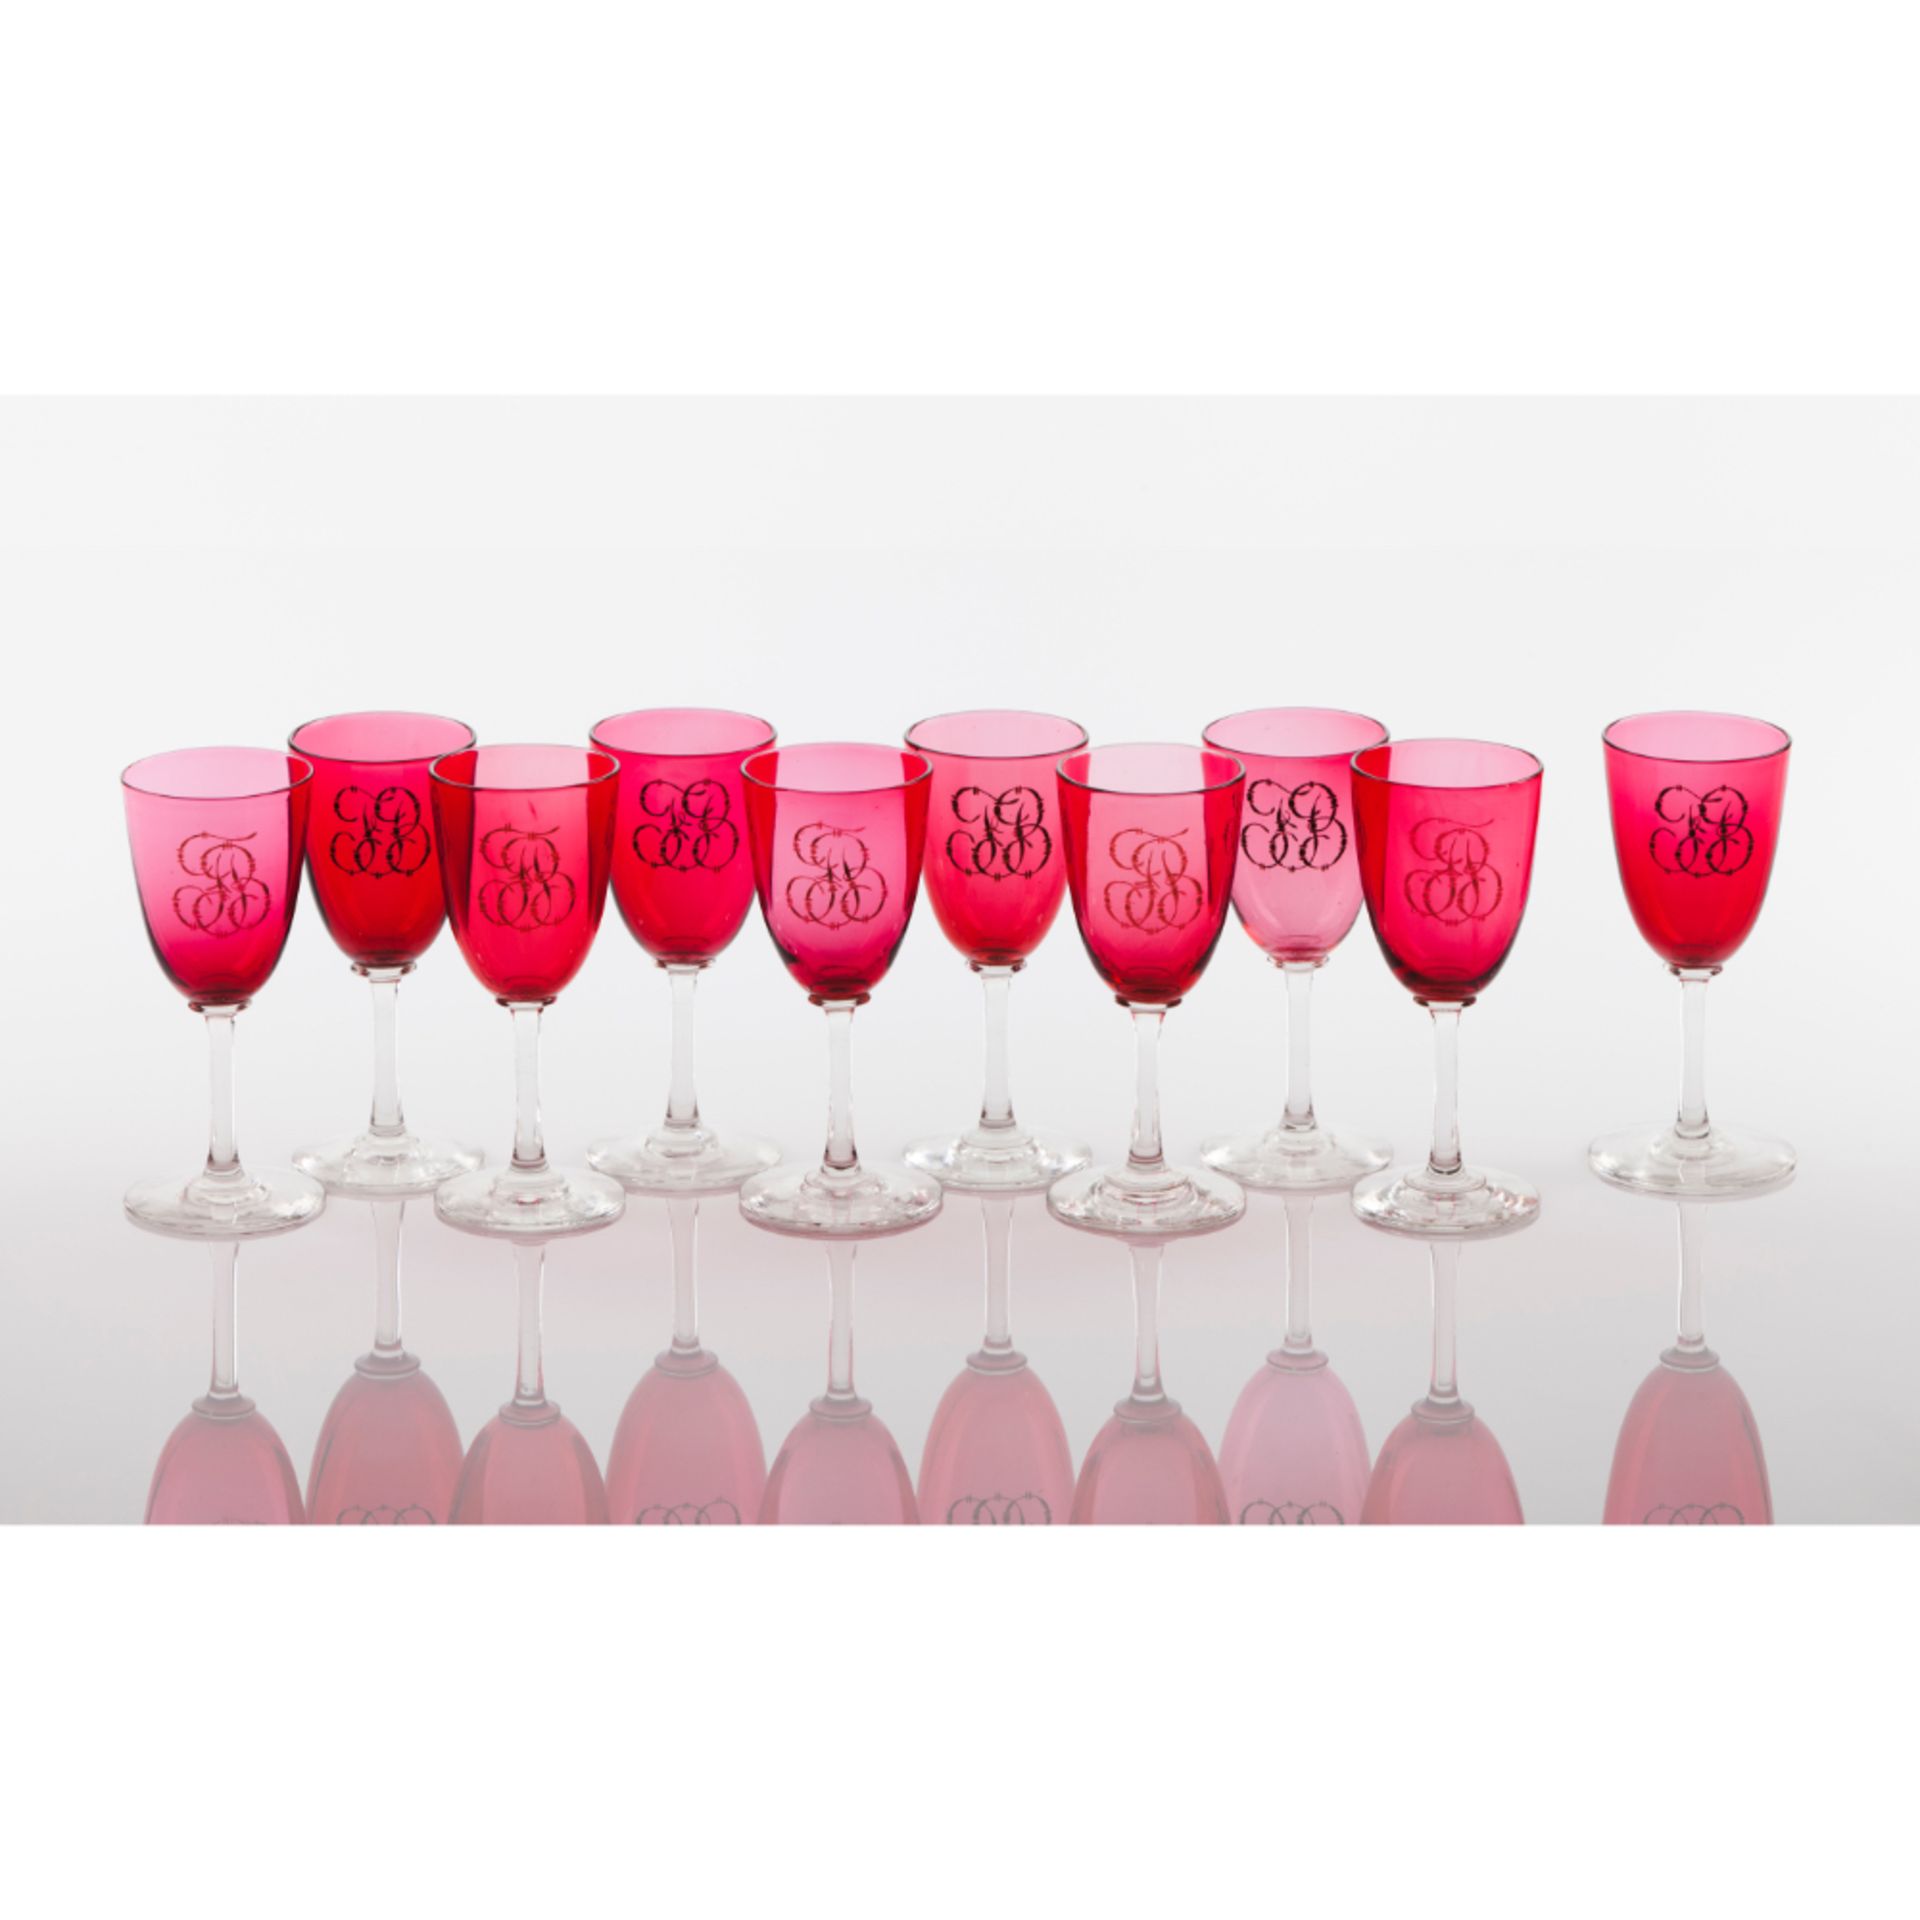 A set of 10 pink drinking glasses